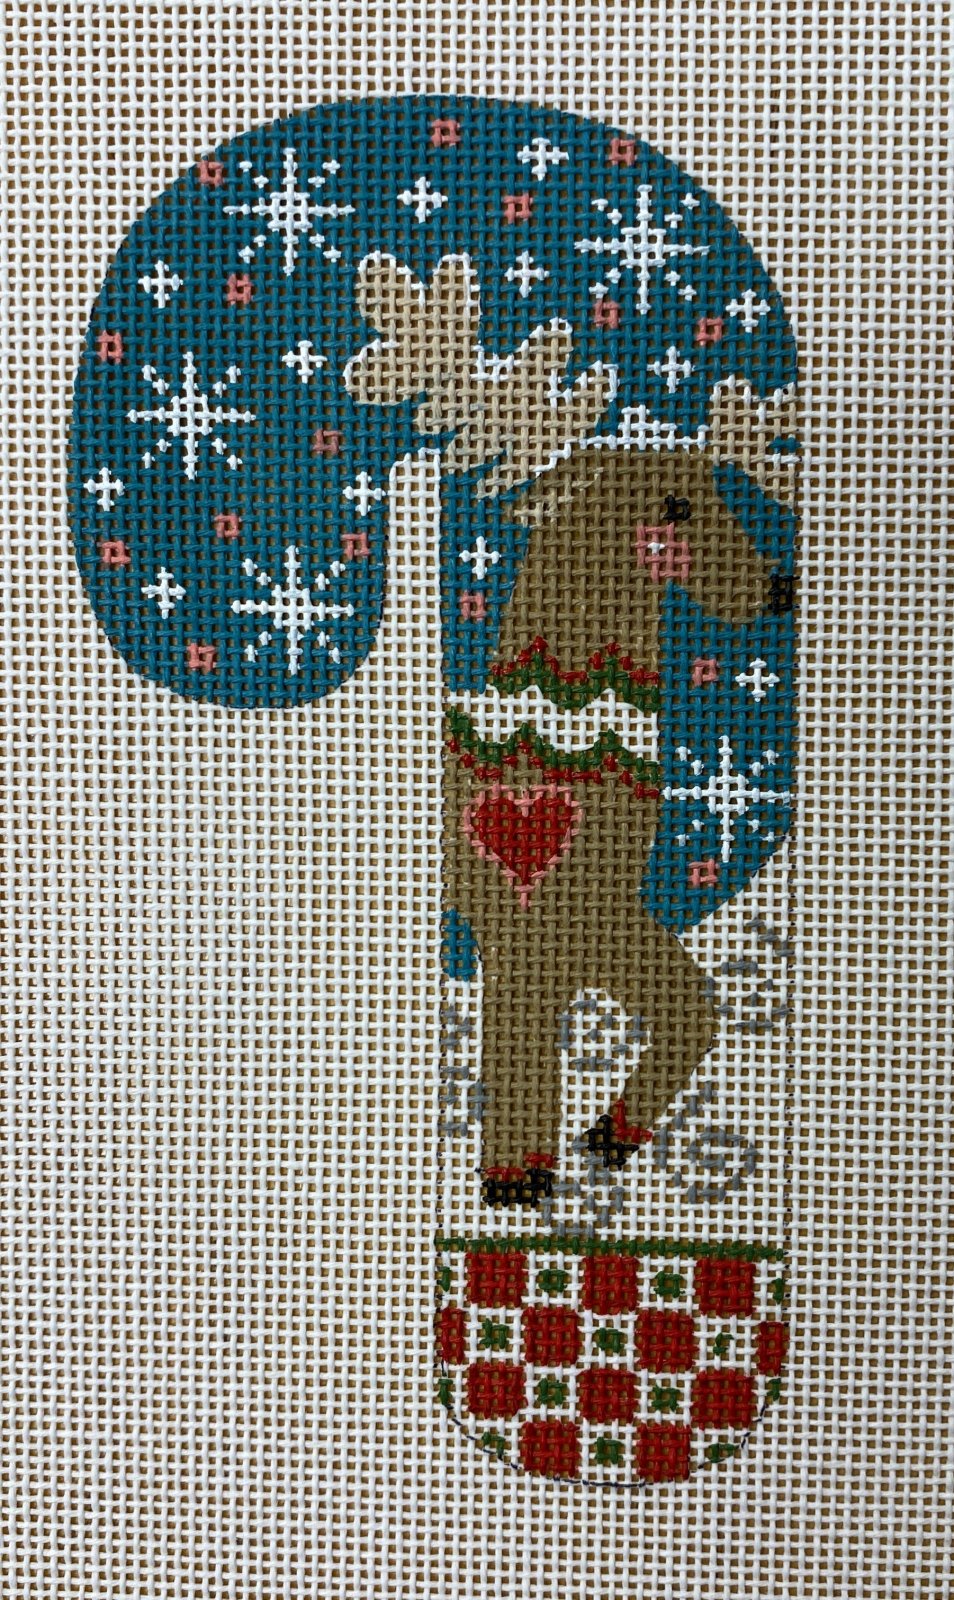 reindeer with heart candy cane